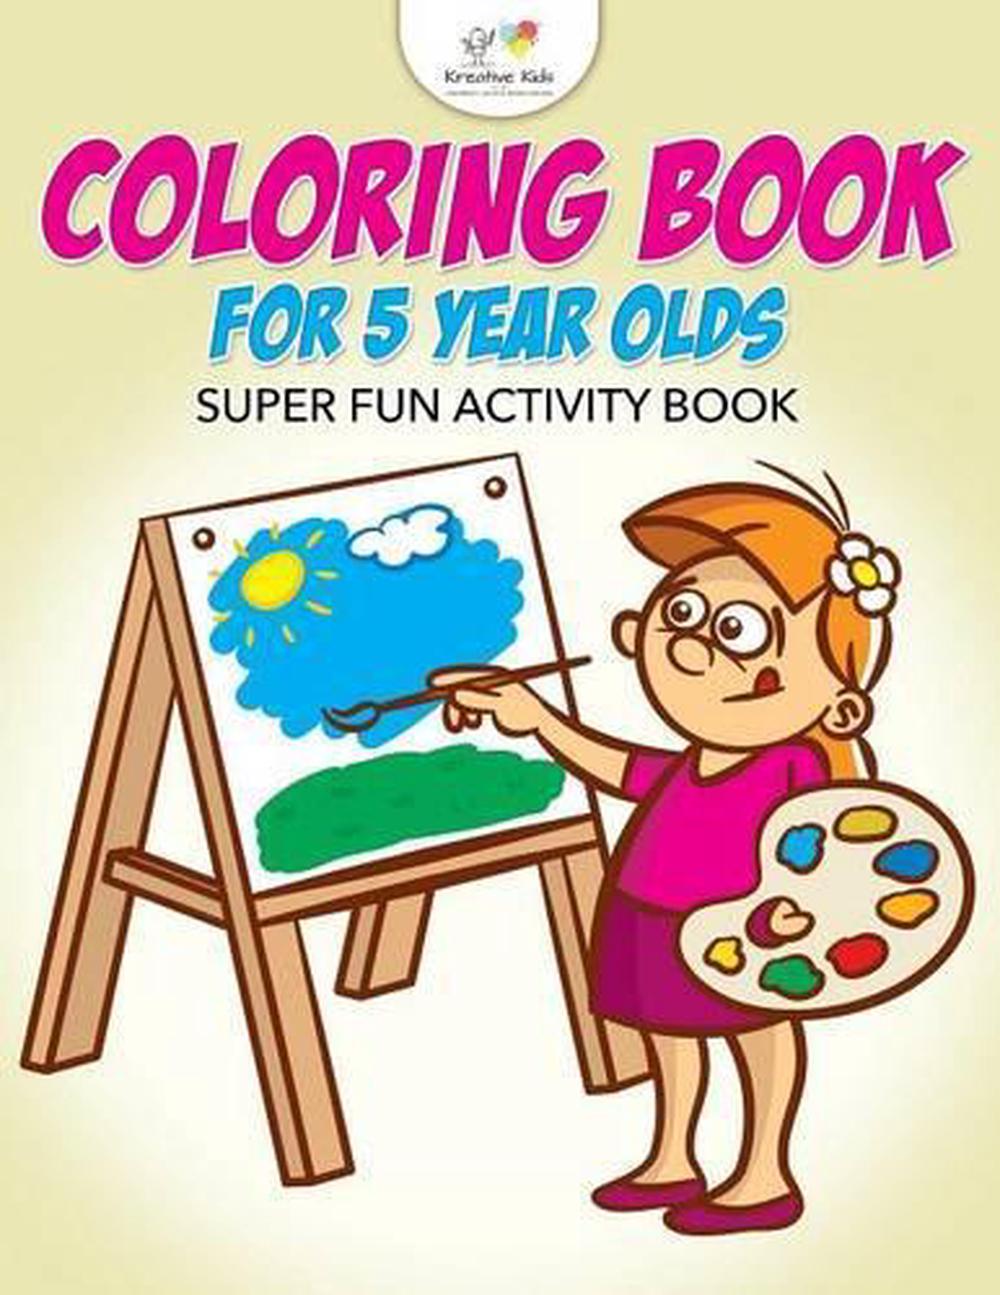 Coloring Book for 5 Year Olds Super Fun Activity Book by Kreative Kids